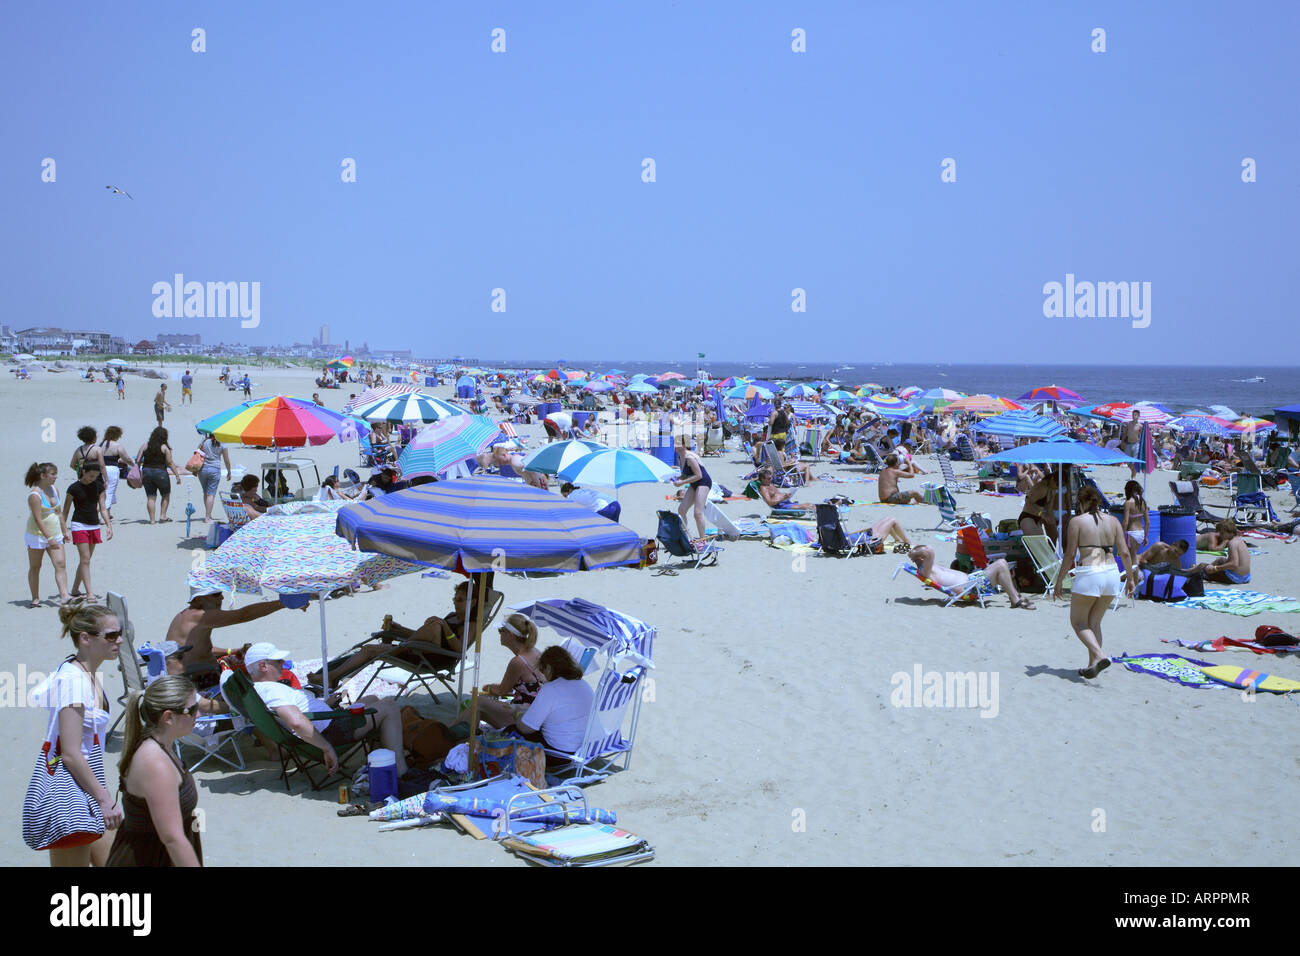 Crowd of people with colorful beach umbrellas, chairs and towels relaxing on sandy beach at New Jersey shore. Stock Photo